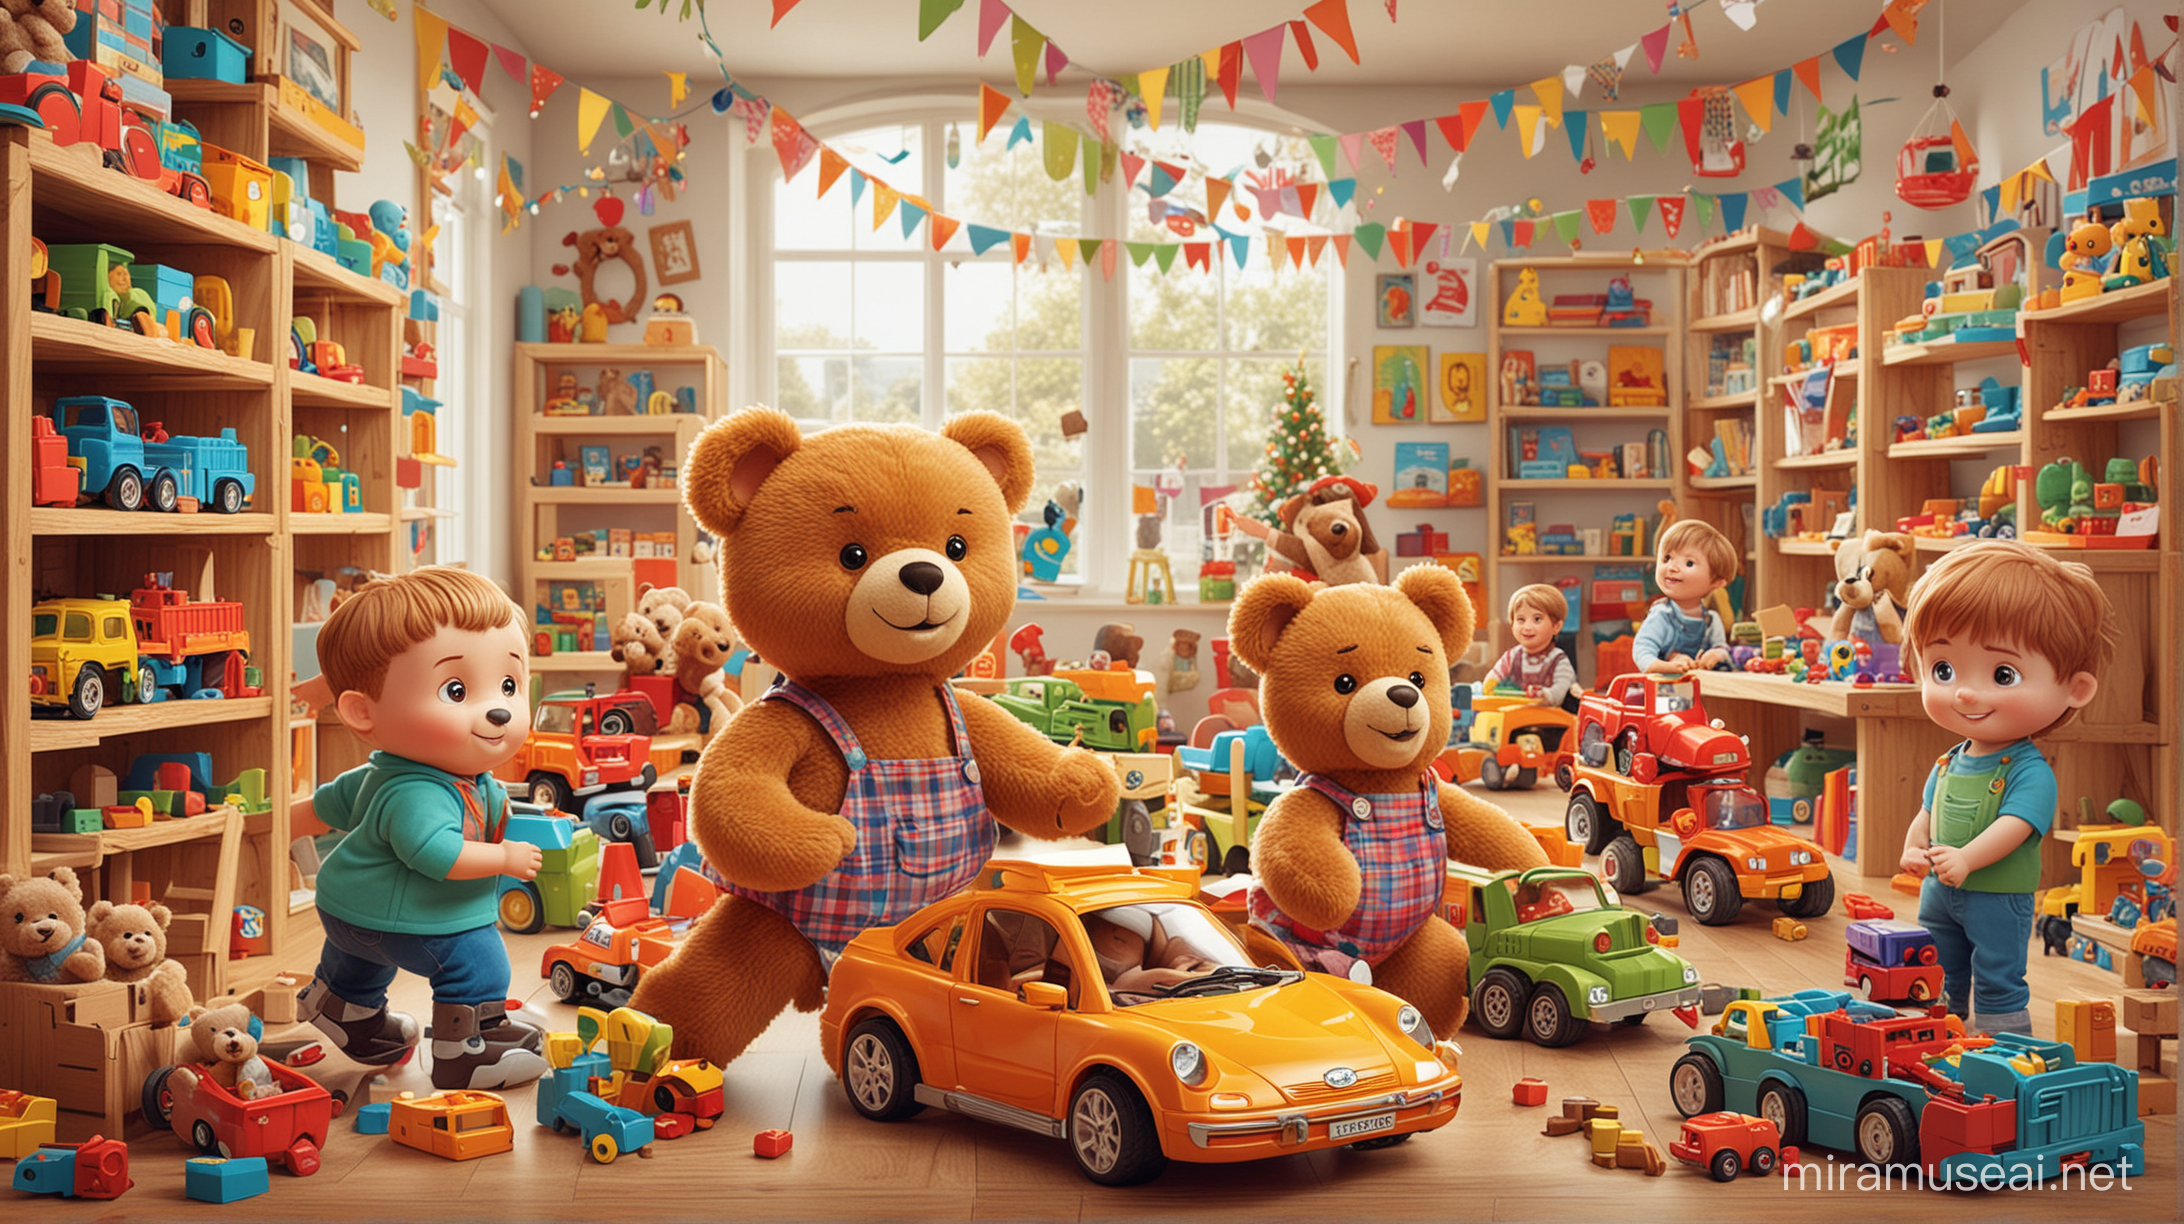 A joyful, colorful illustration designed for a children's toy store. The image should include bright, cartoonish images of children of different nationalities playing with a variety of toys: teddy bears, wooden constructors, bright plastic cars and educational games. The background should be bright and cheerful, with elements that create an atmosphere of magic and joy. 